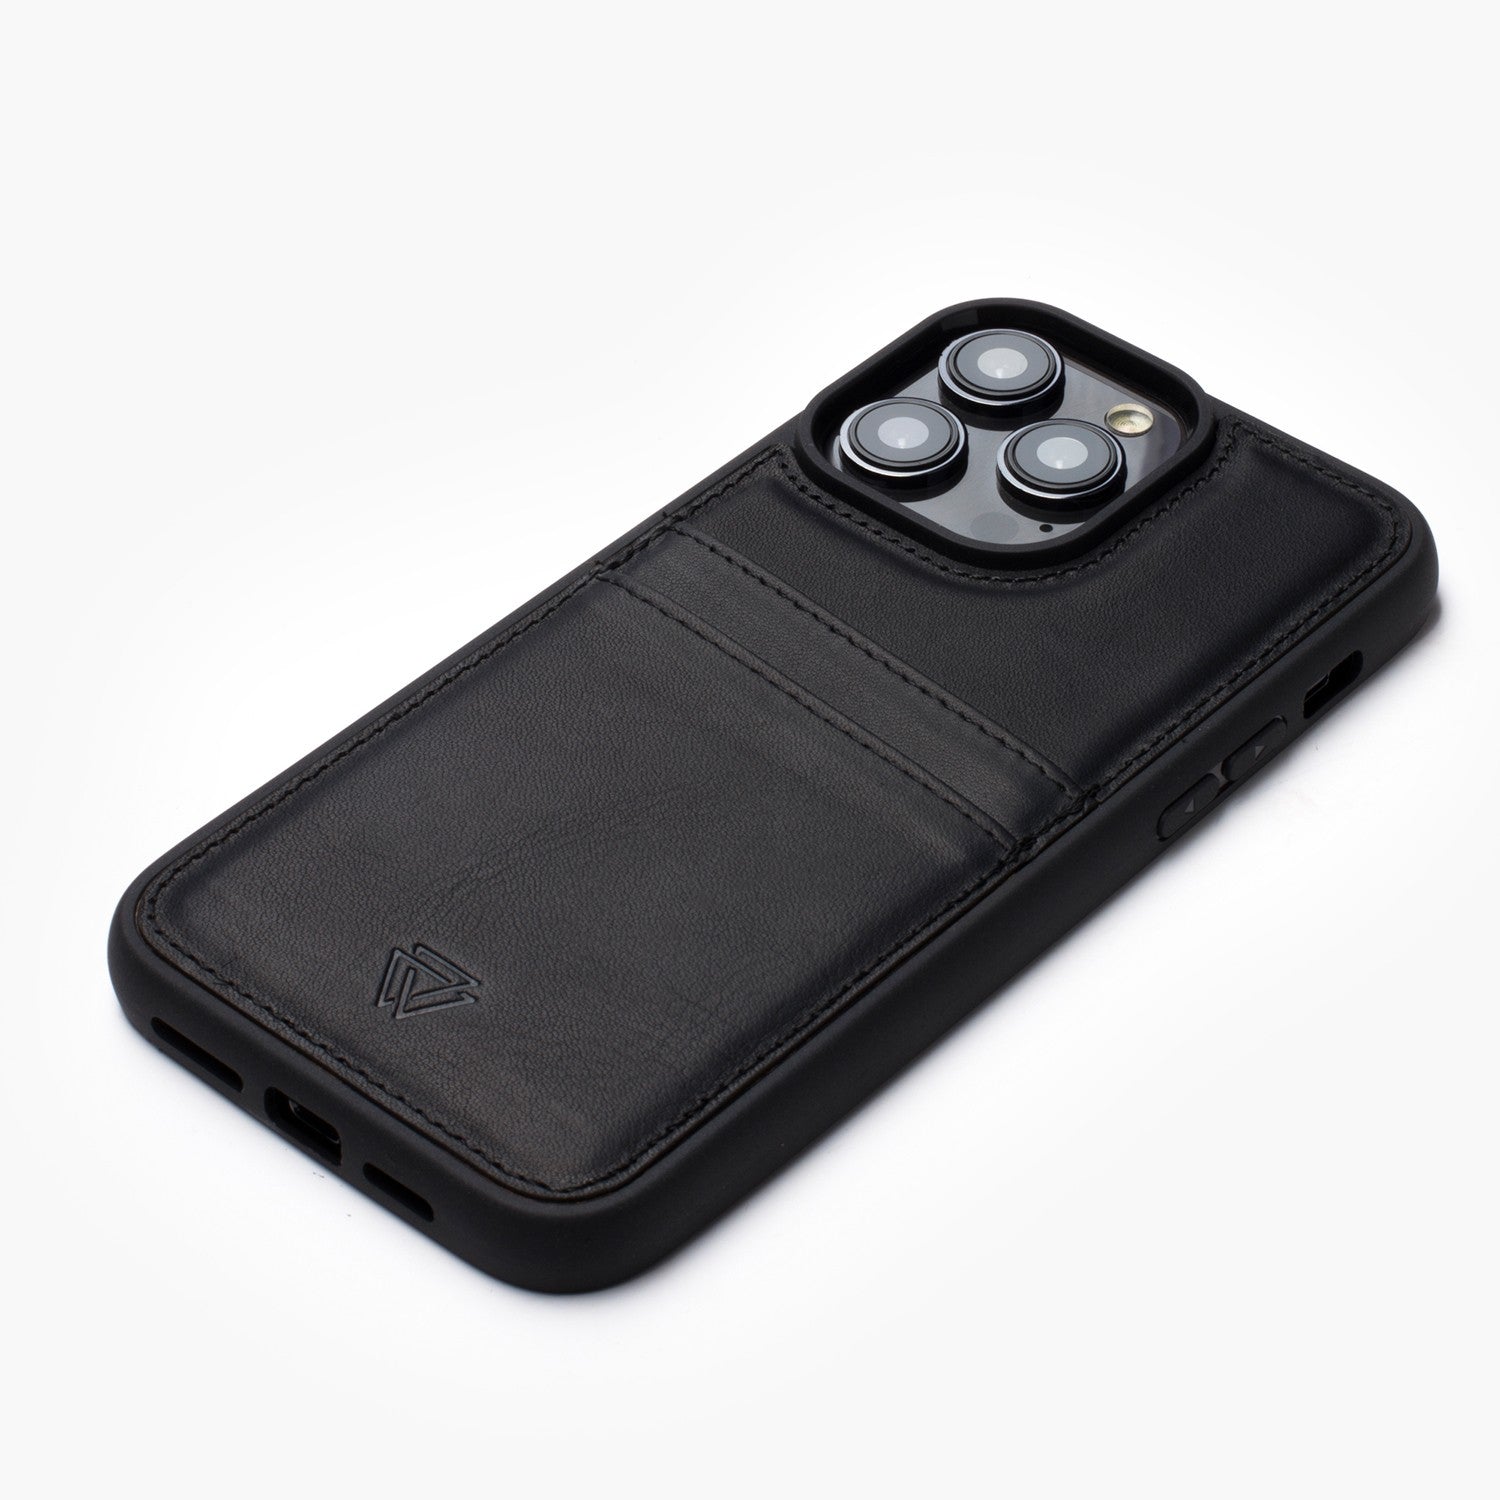 Wachikopa leather Back Cover C.C. Case for iPhone 12 Black